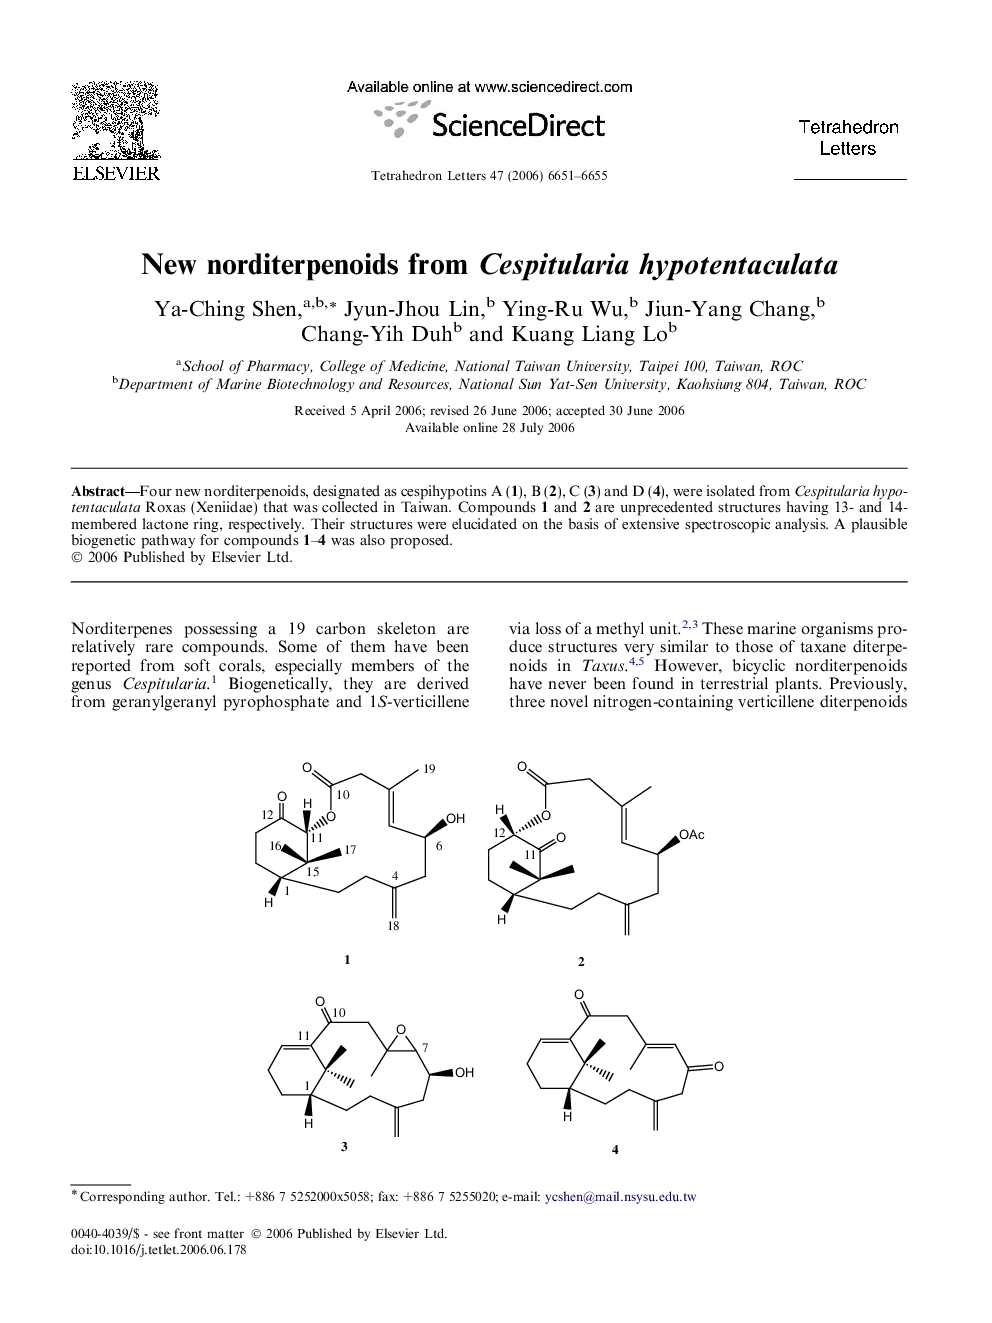 New norditerpenoids from Cespitularia hypotentaculata